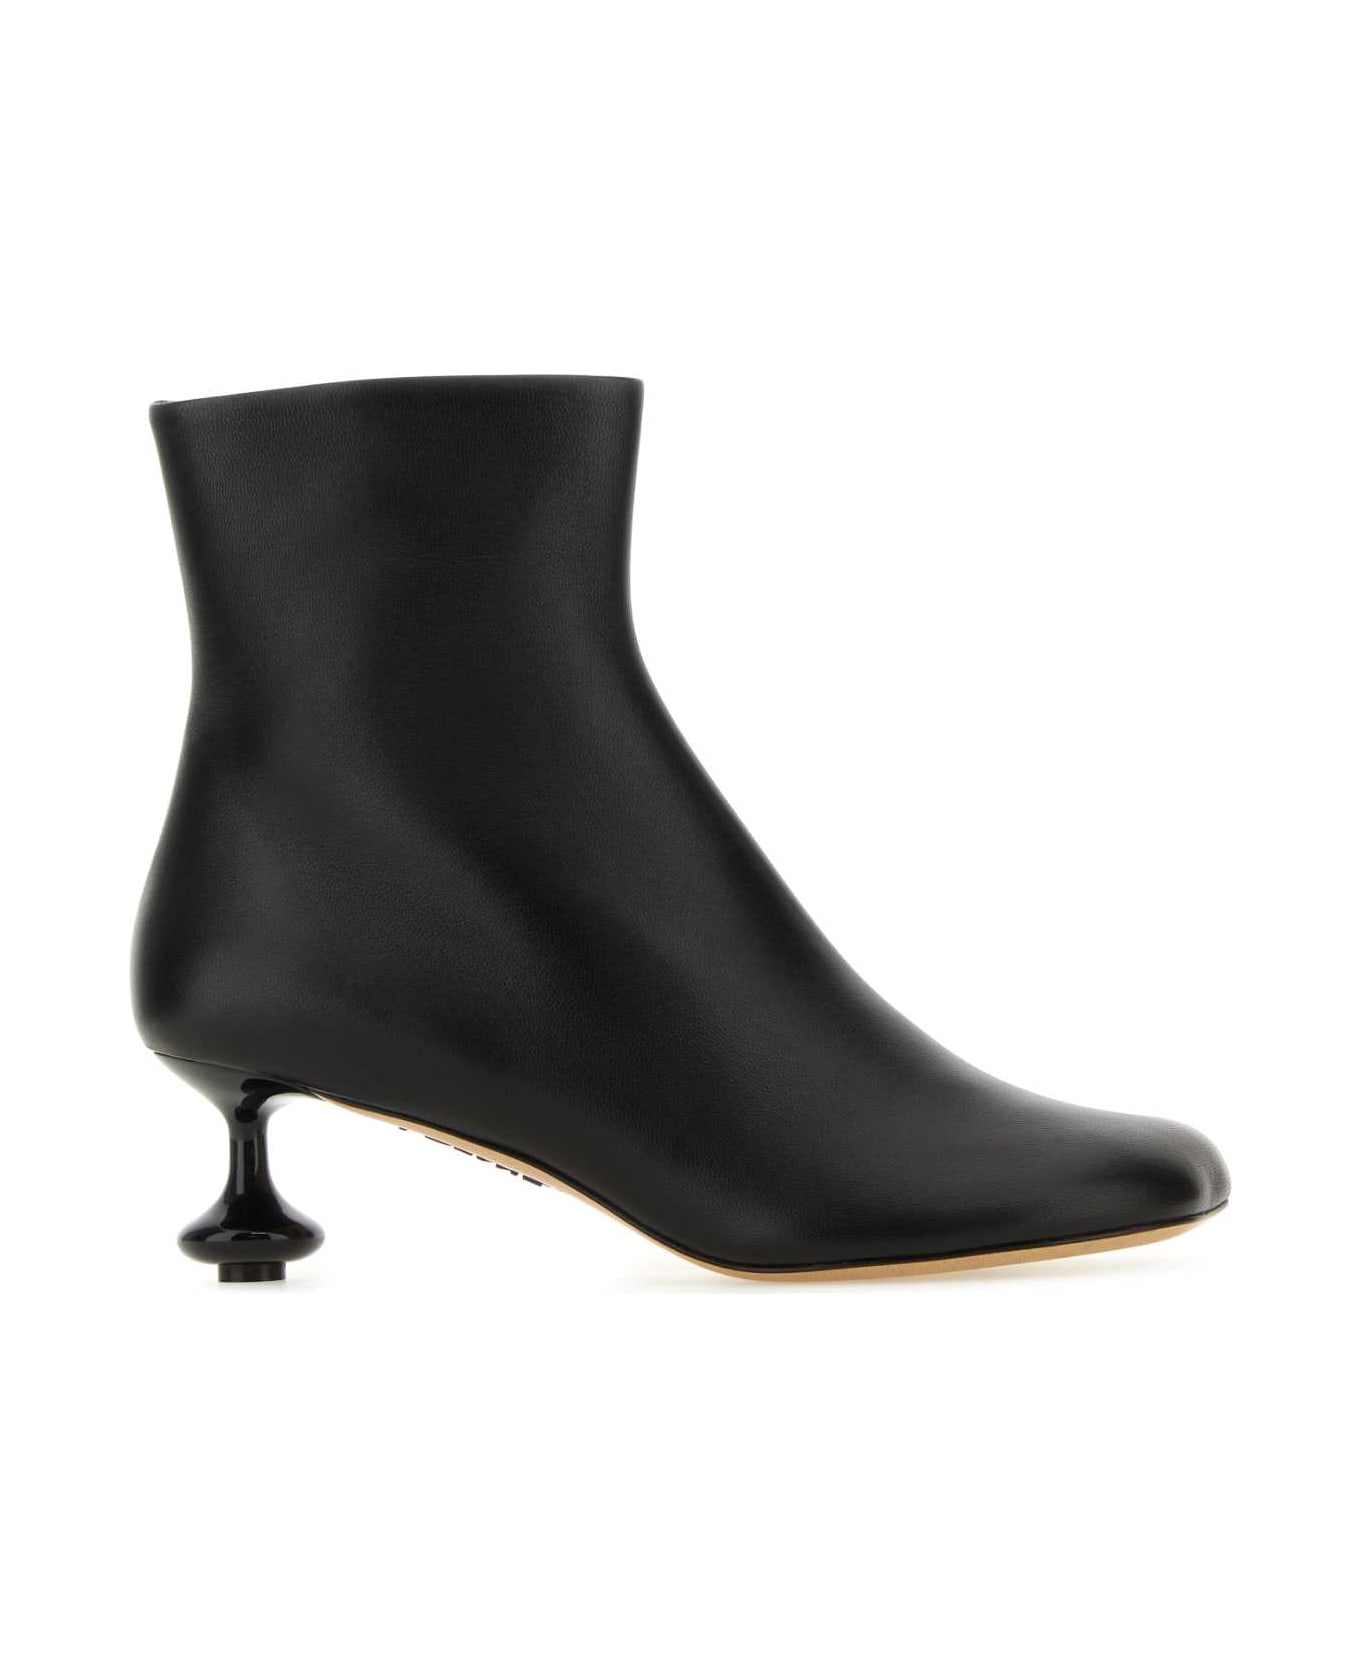 Loewe Black Nappa Leather Toy Ankle Boots - BLACK ブーツ